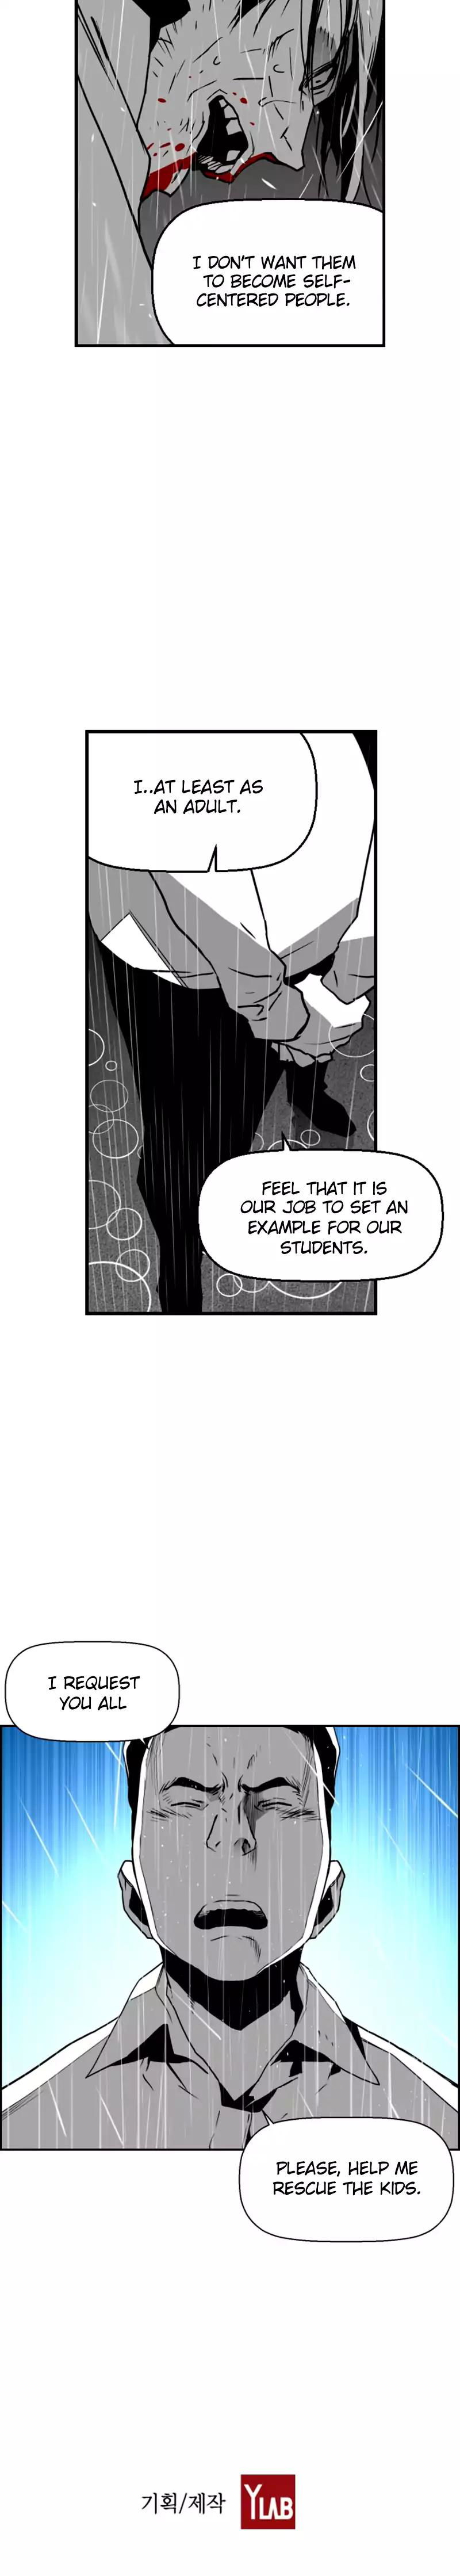 Terror Man Chapter 56 page 18